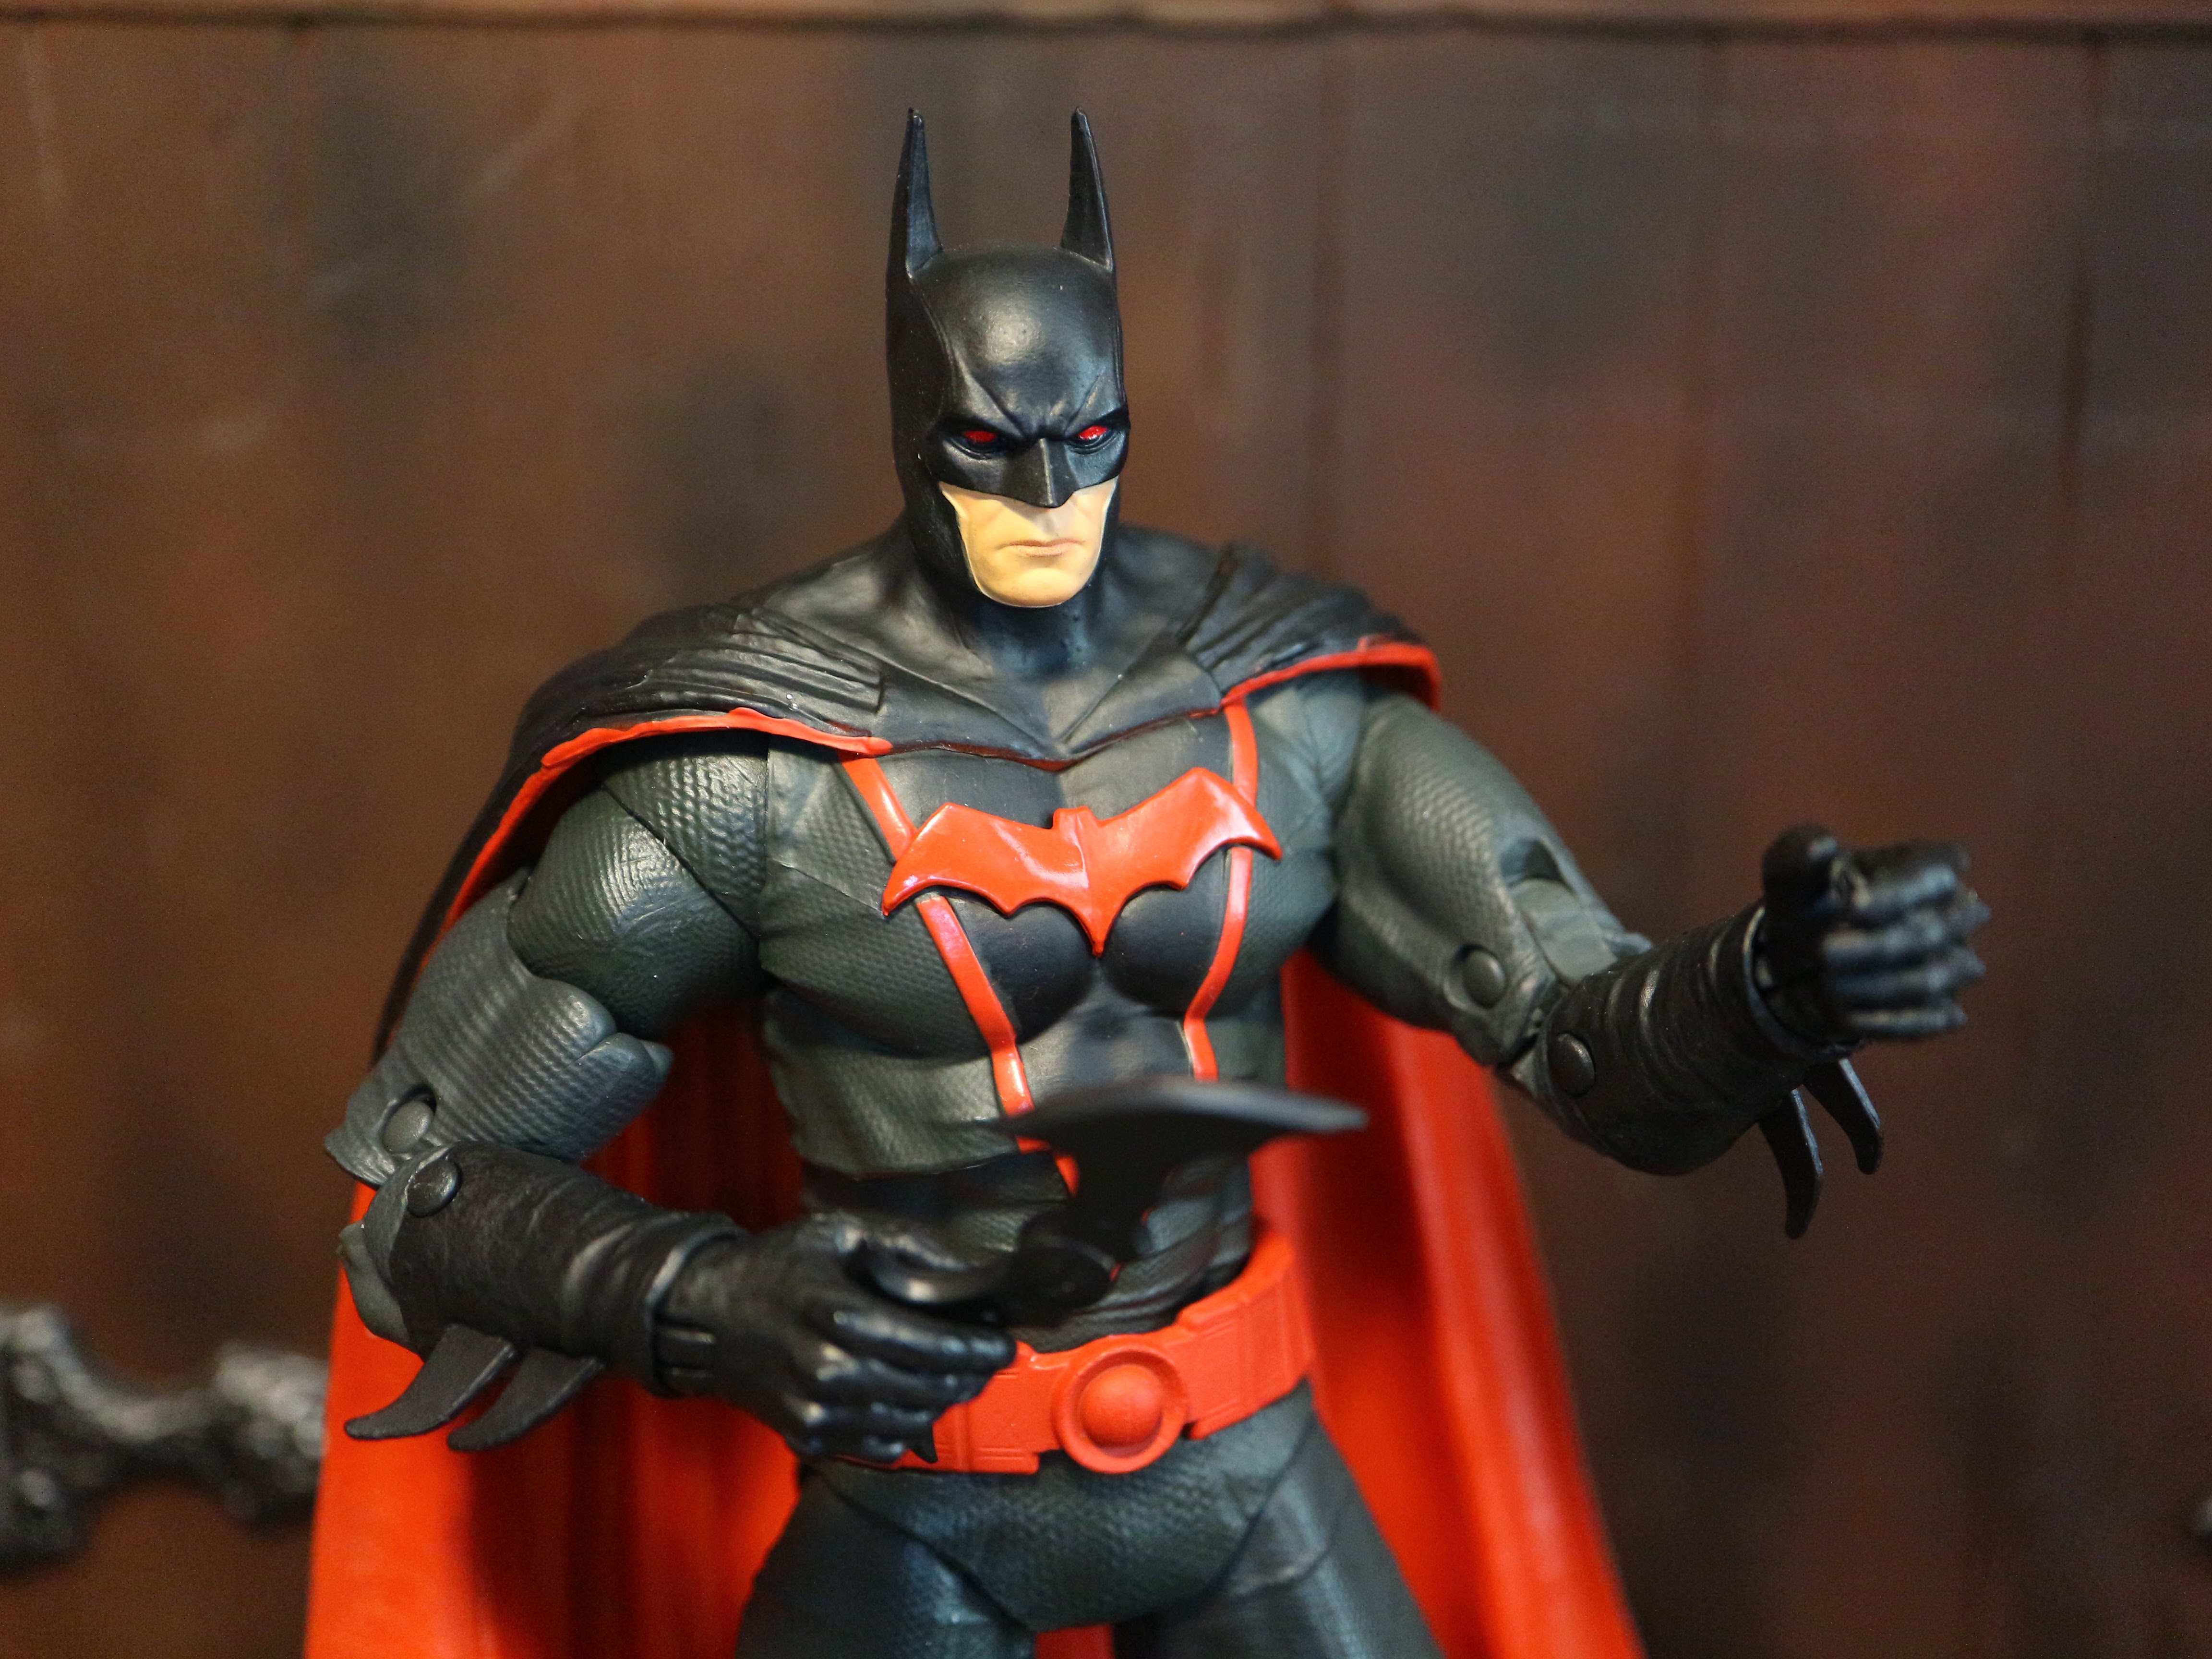 Action Figure Barbecue: Action Figure Review: Earth -2 Batman